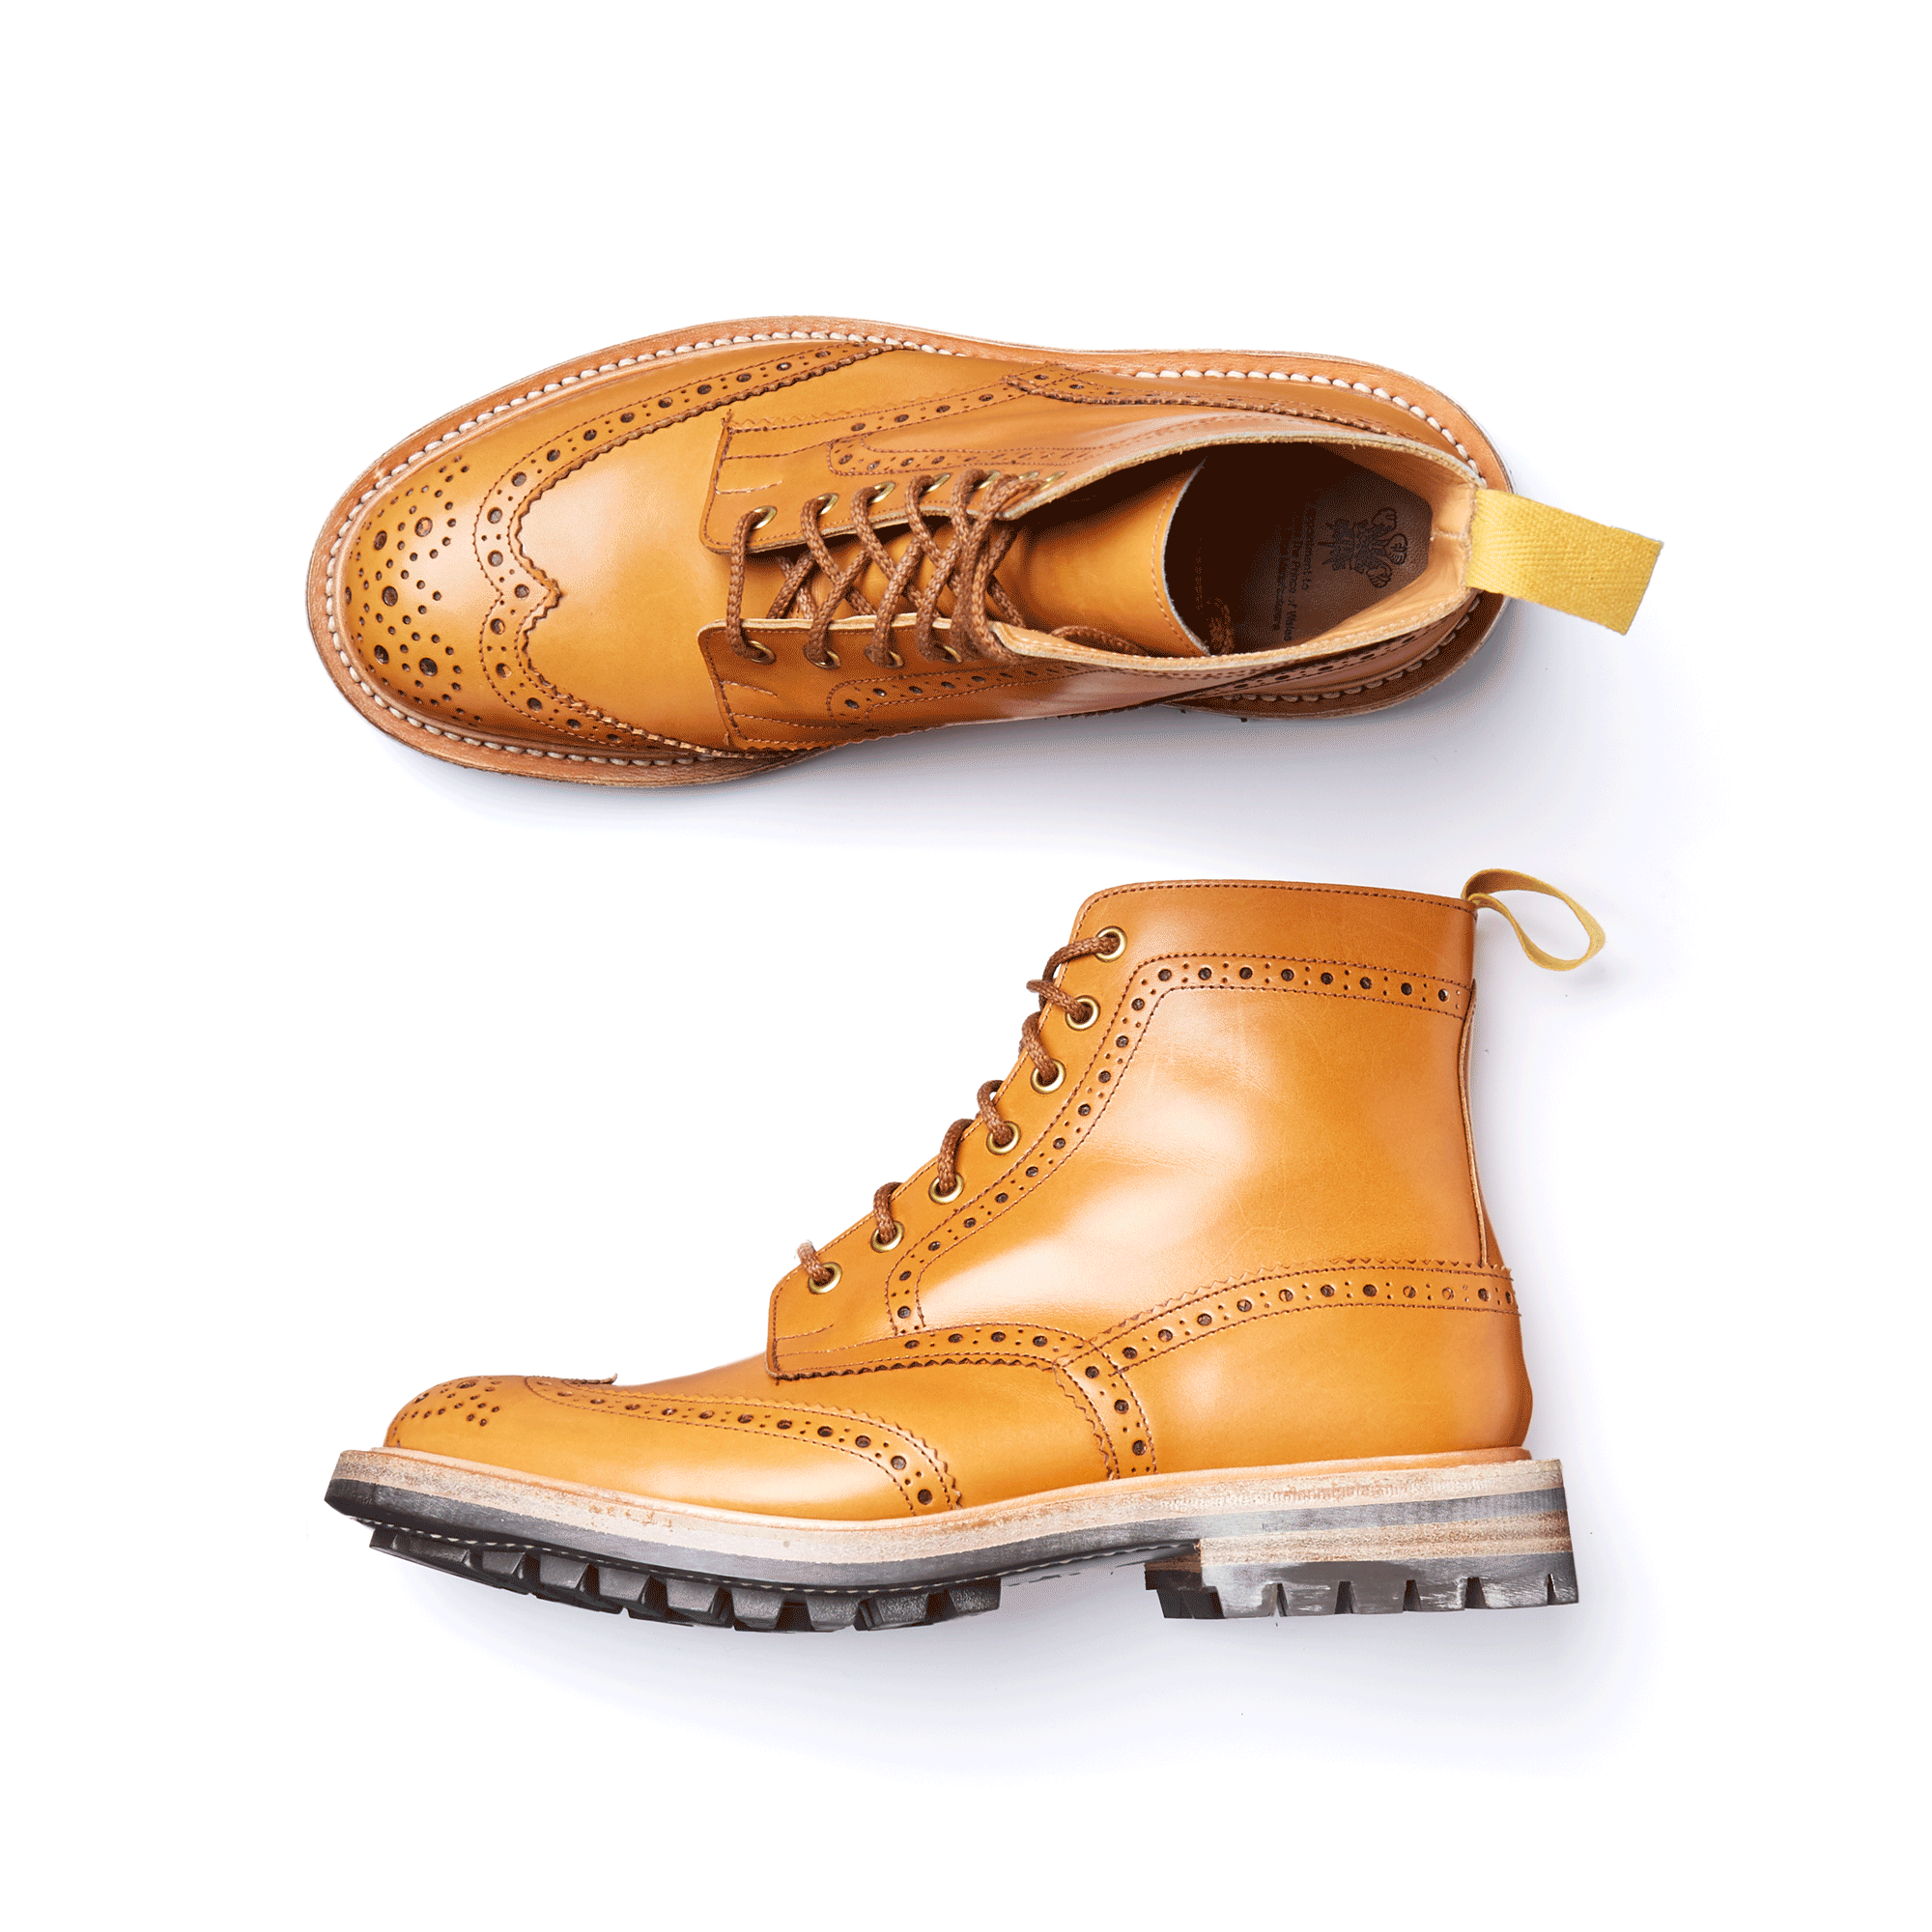 DivisionRoad_ x Tricker's Acorn Stow Boot Patina